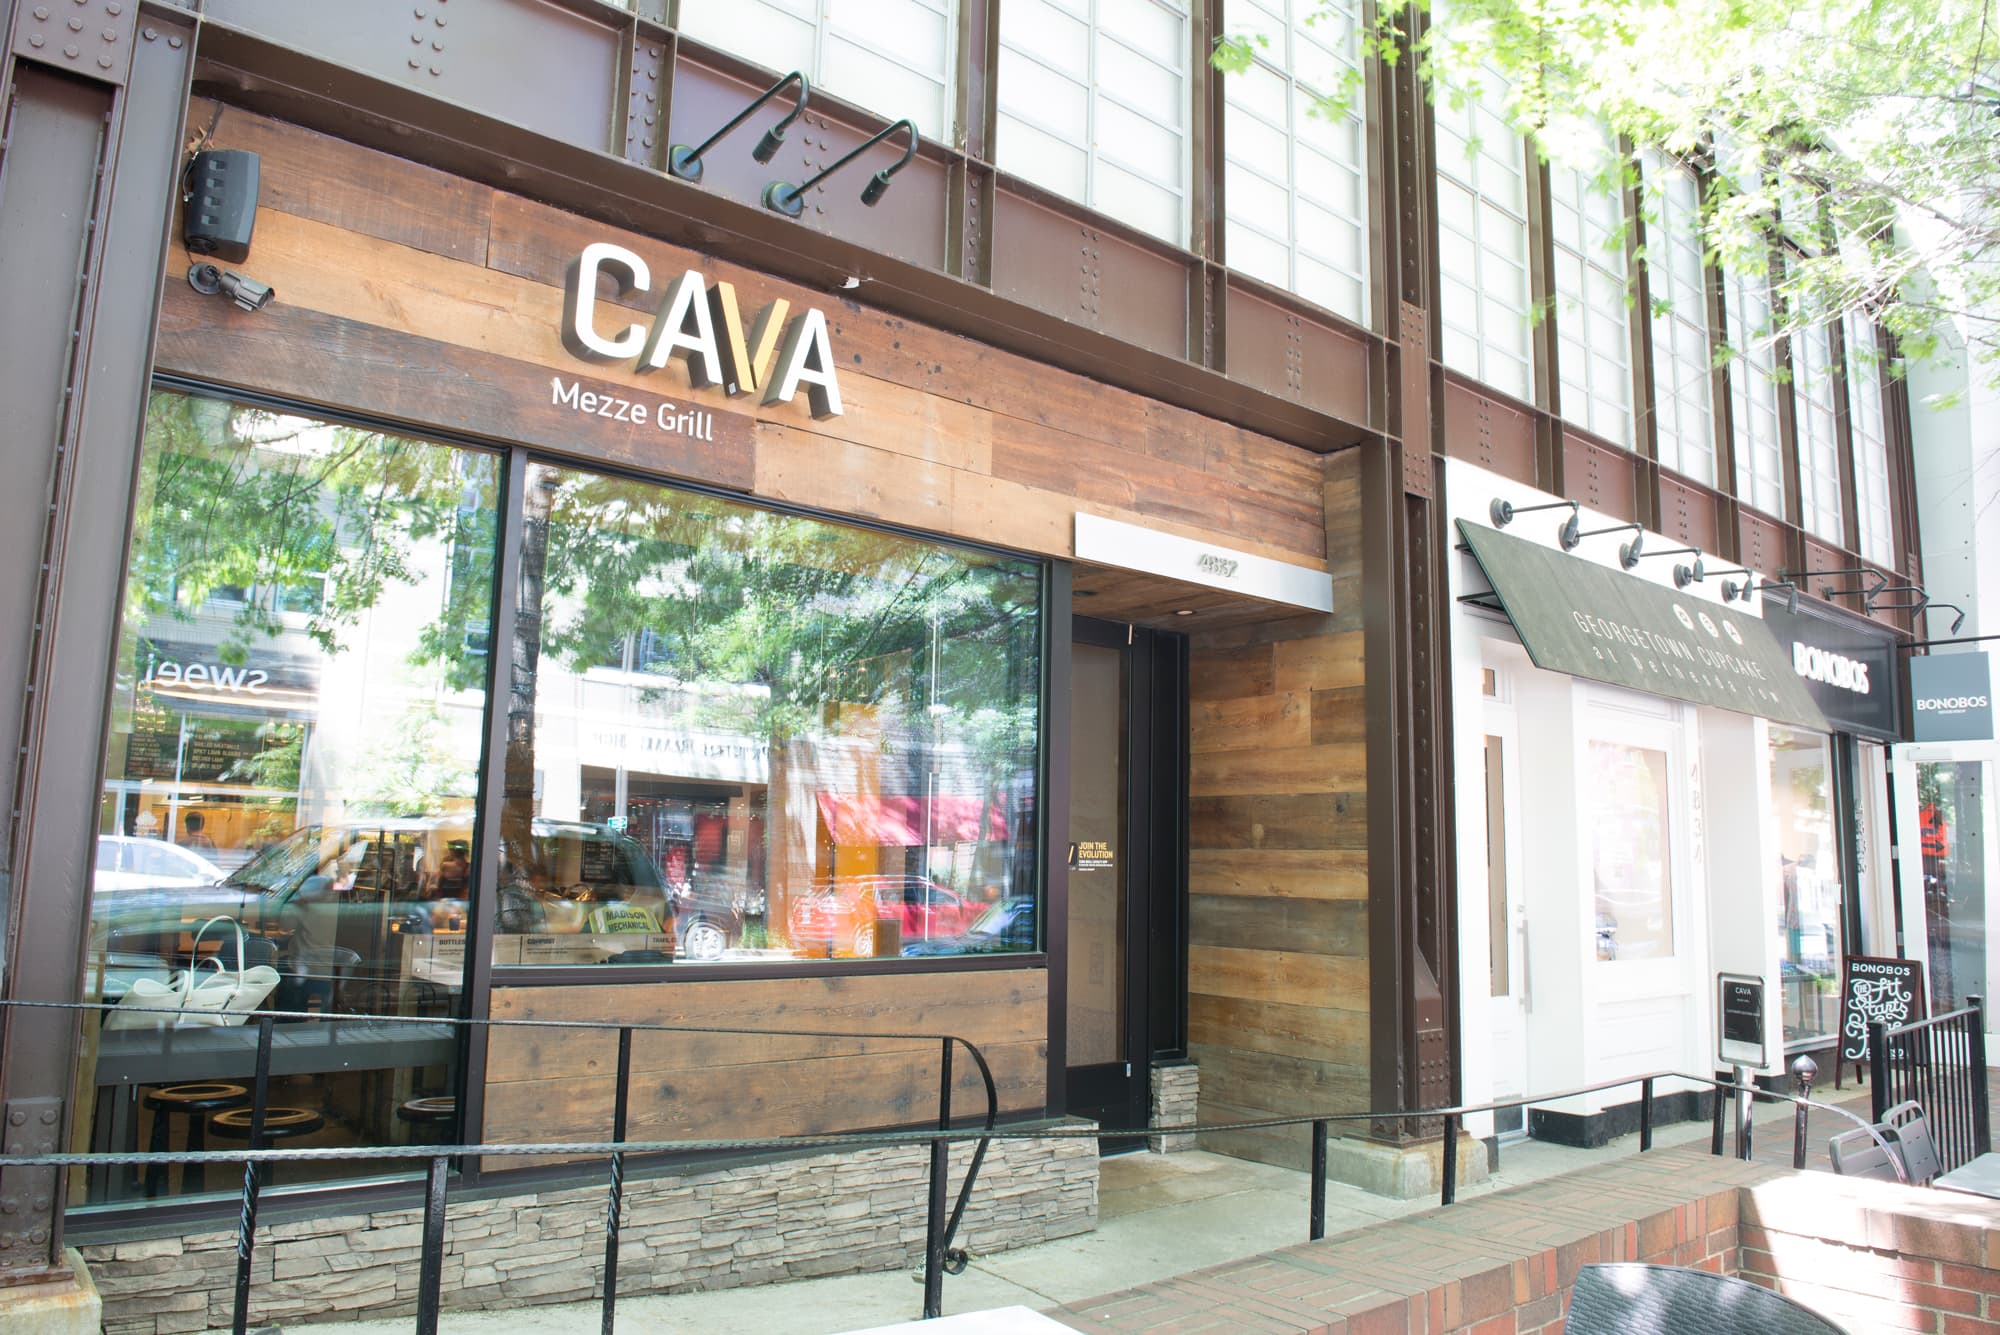 Cava focuses on suburban growth as pandemic changes consumer trends